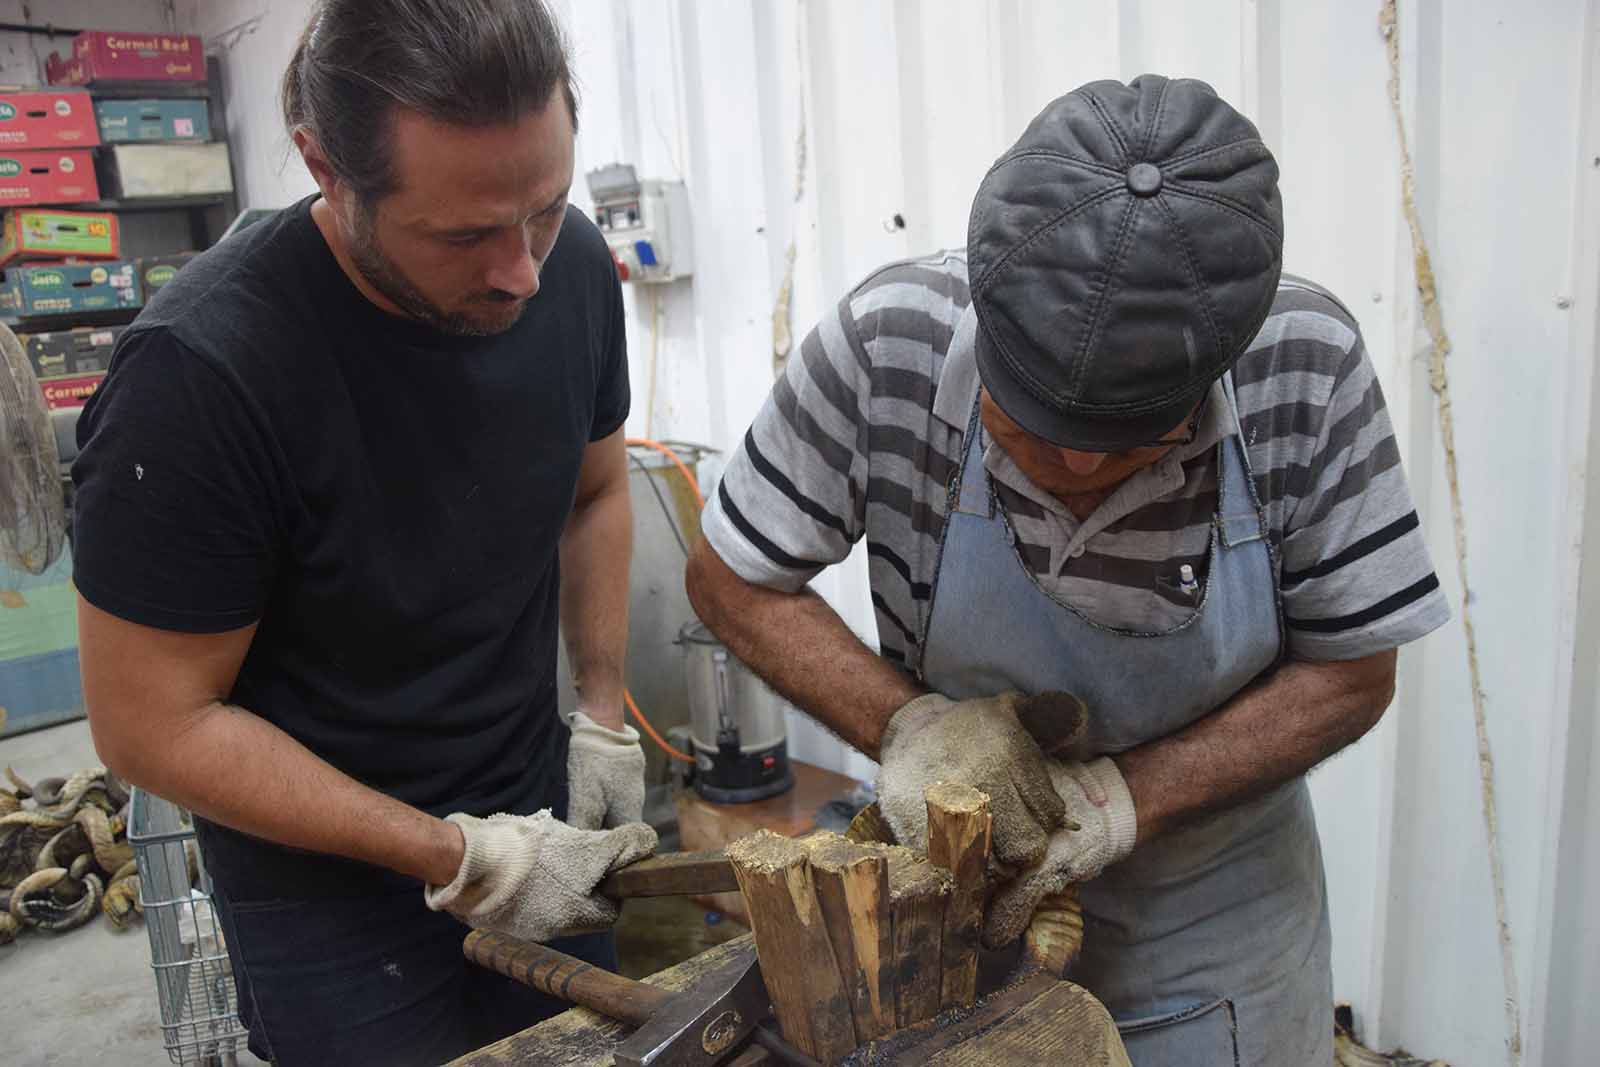 Father and son work together to produce the shofars, credit: Yael Elnatan